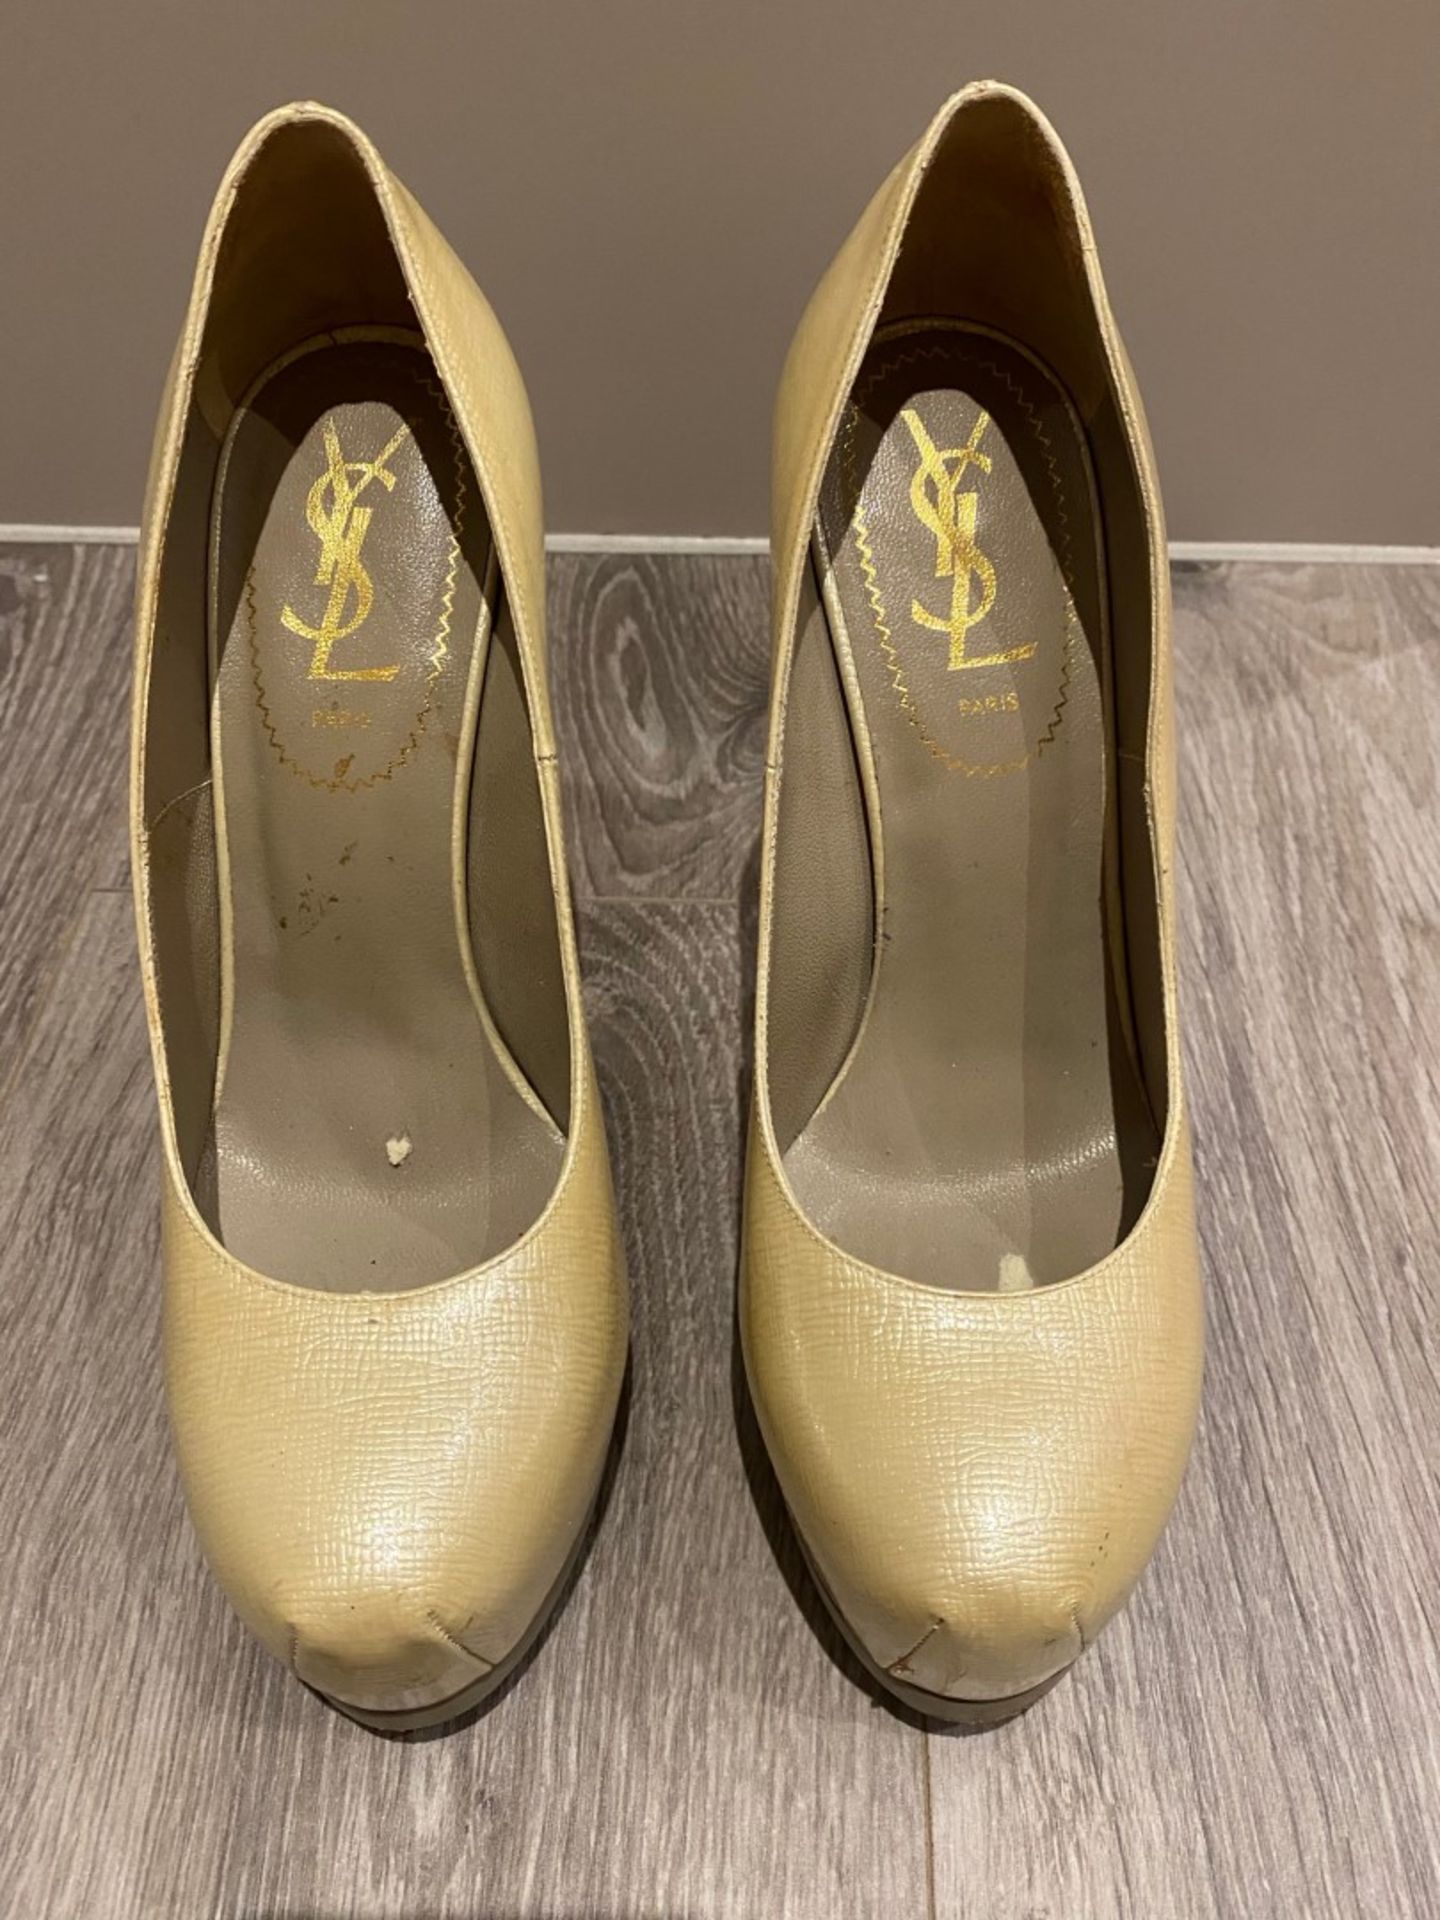 1 x Pair Of Genuine YSL High Heel Shoes In Champagne - Size: 36 - Preowned in Worn Condition - Ref: - Image 5 of 5